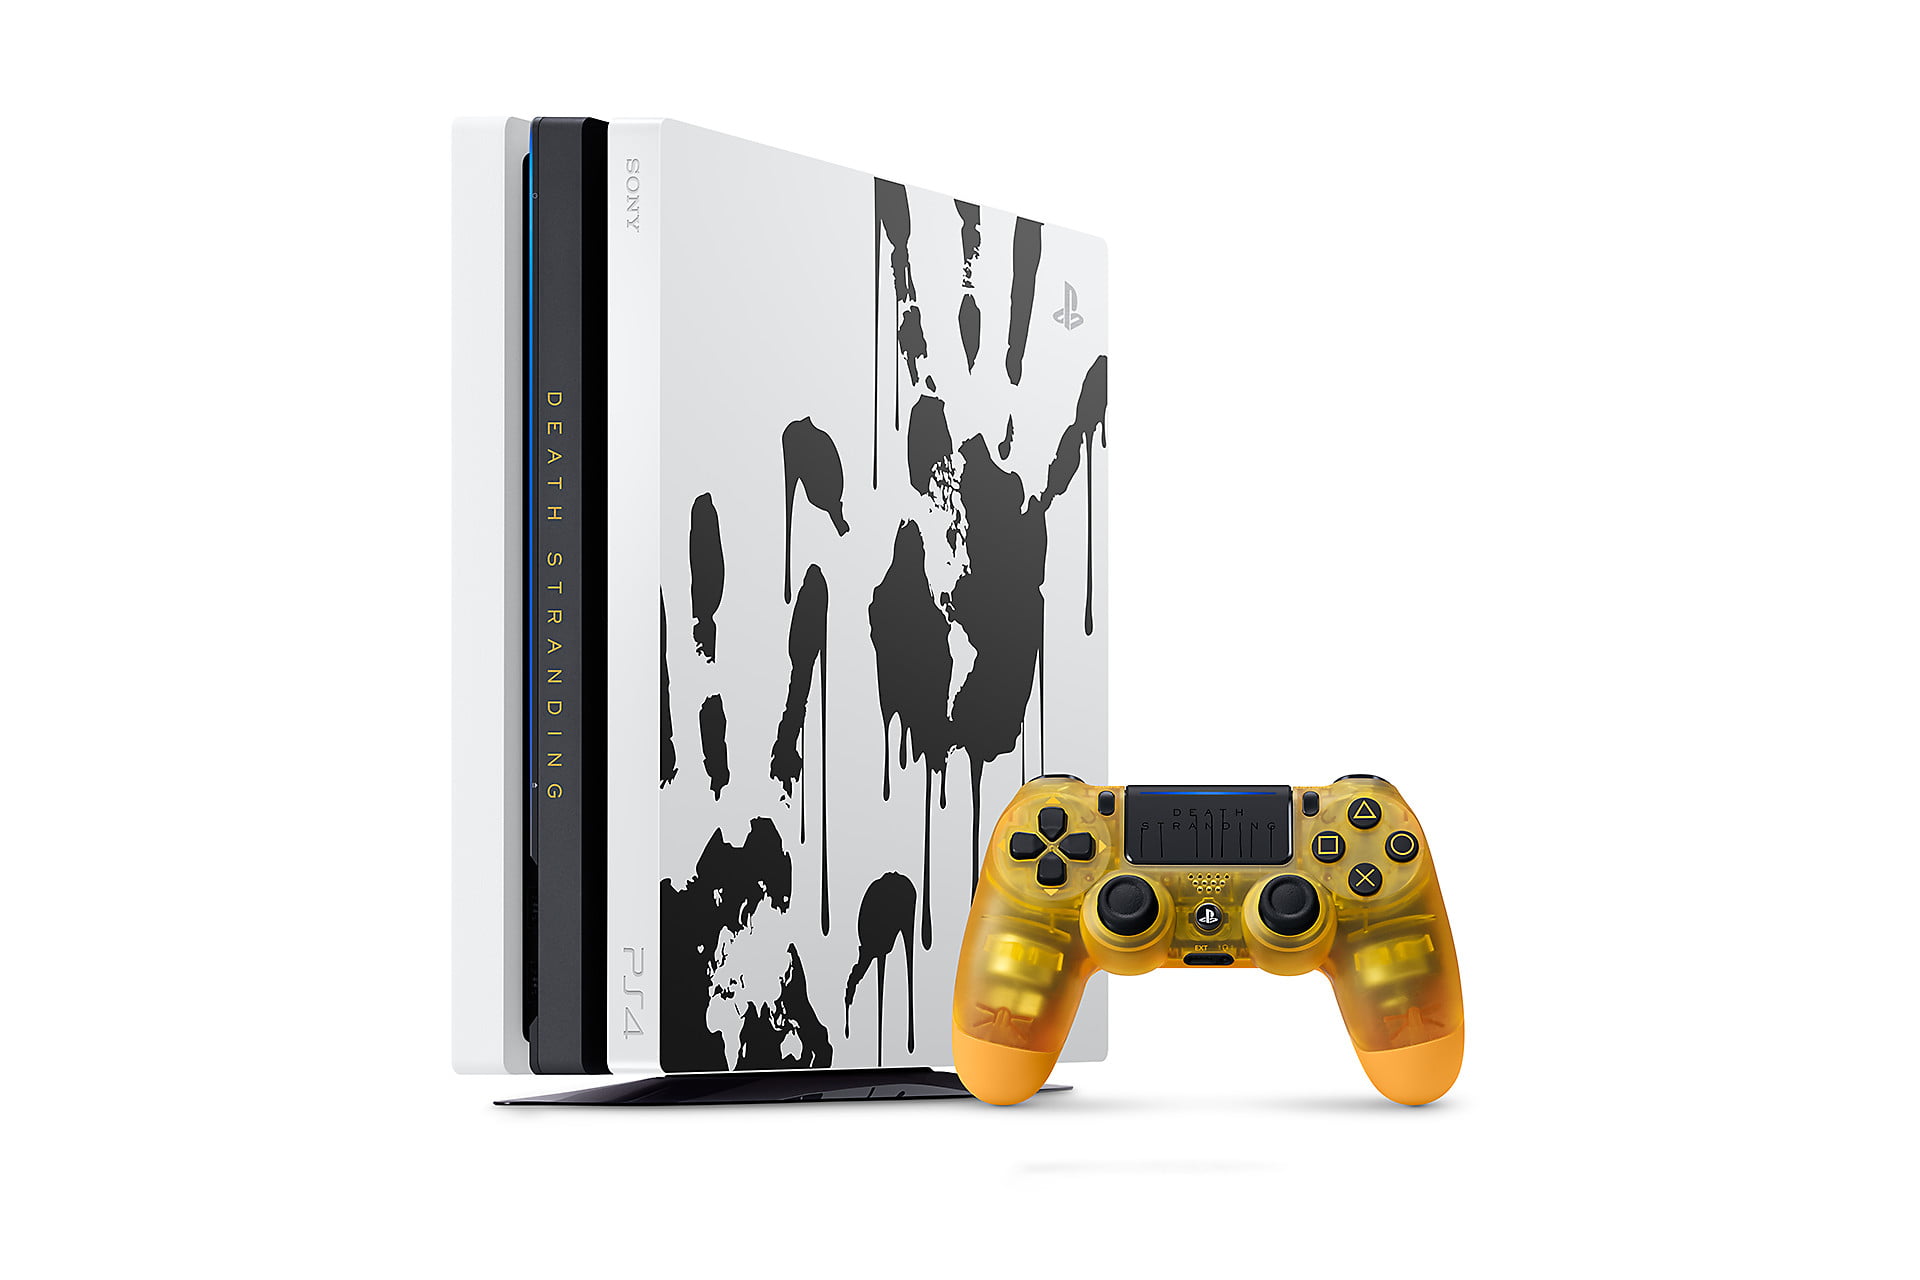 PlayStation 4 Pro 1TB Limited Death Stranding Edition 4K HDR Gaming Console  Bundle With an Extra Blue Camouflage DualShock 4 Wireless Controller